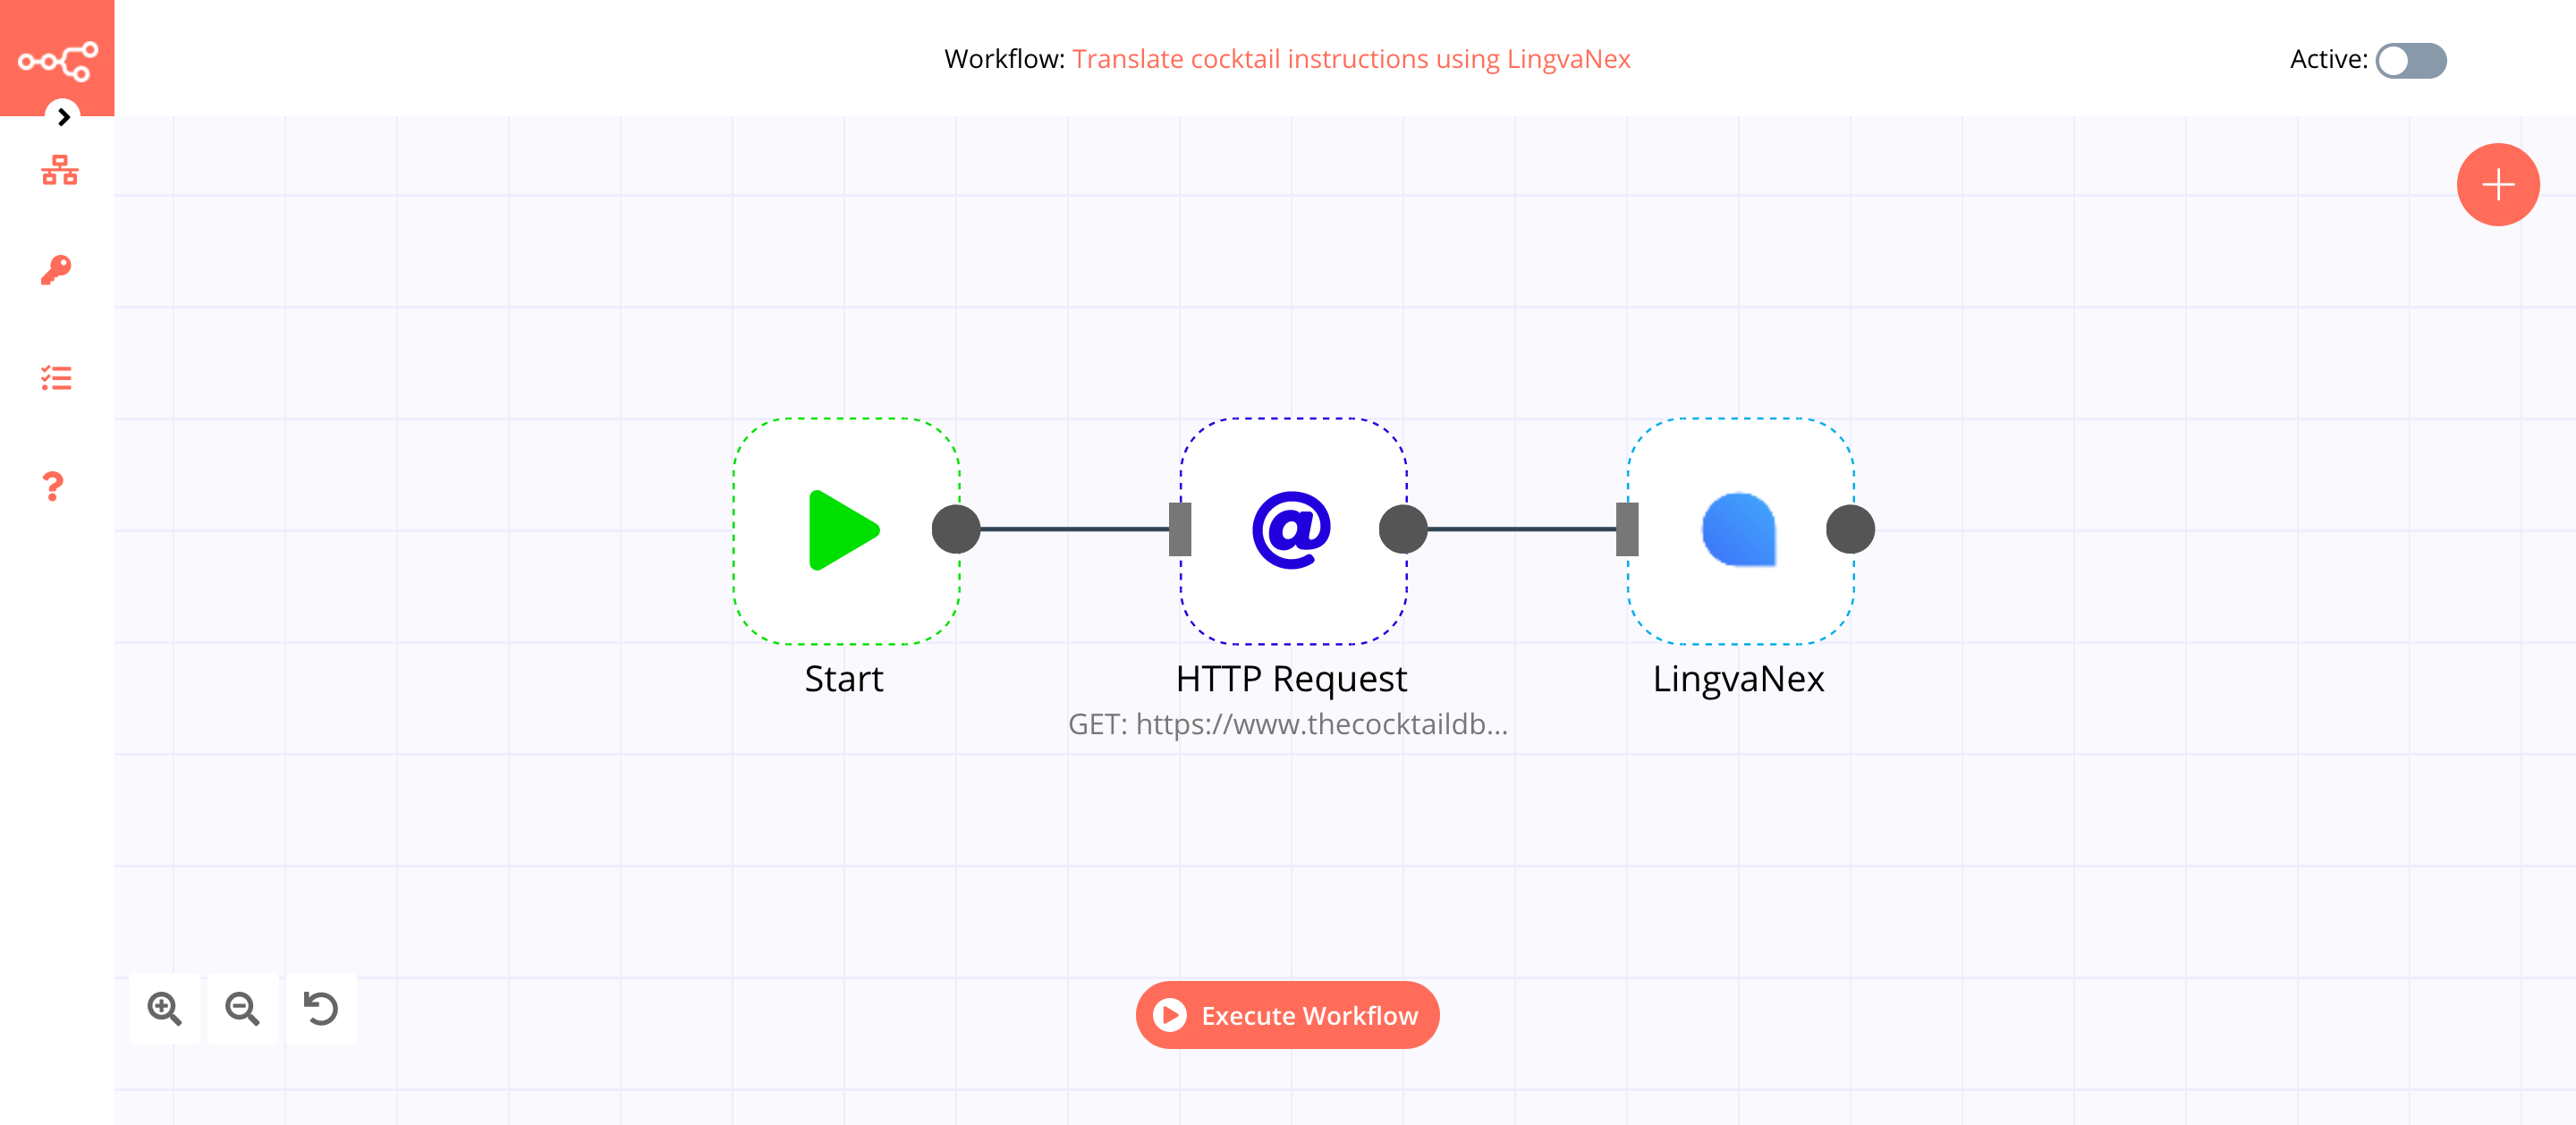 A workflow with the LingvaNex node